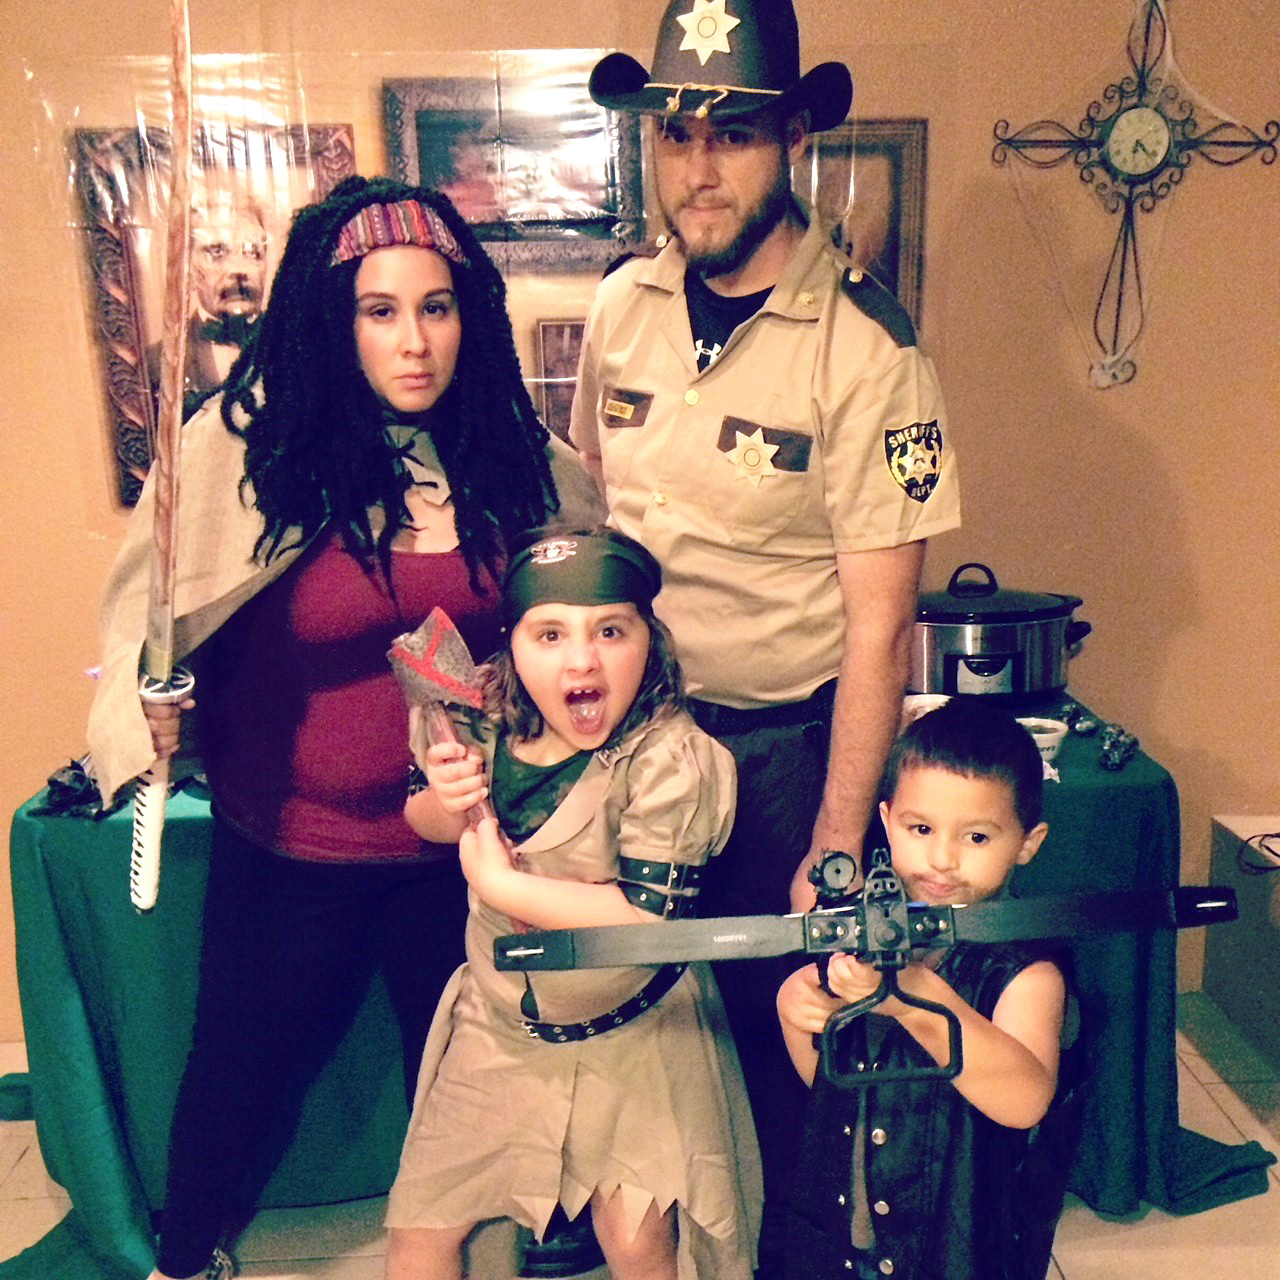 PHOTO: The Basteen family dressed as "The Walking Dead" characters for Halloween in 2014.